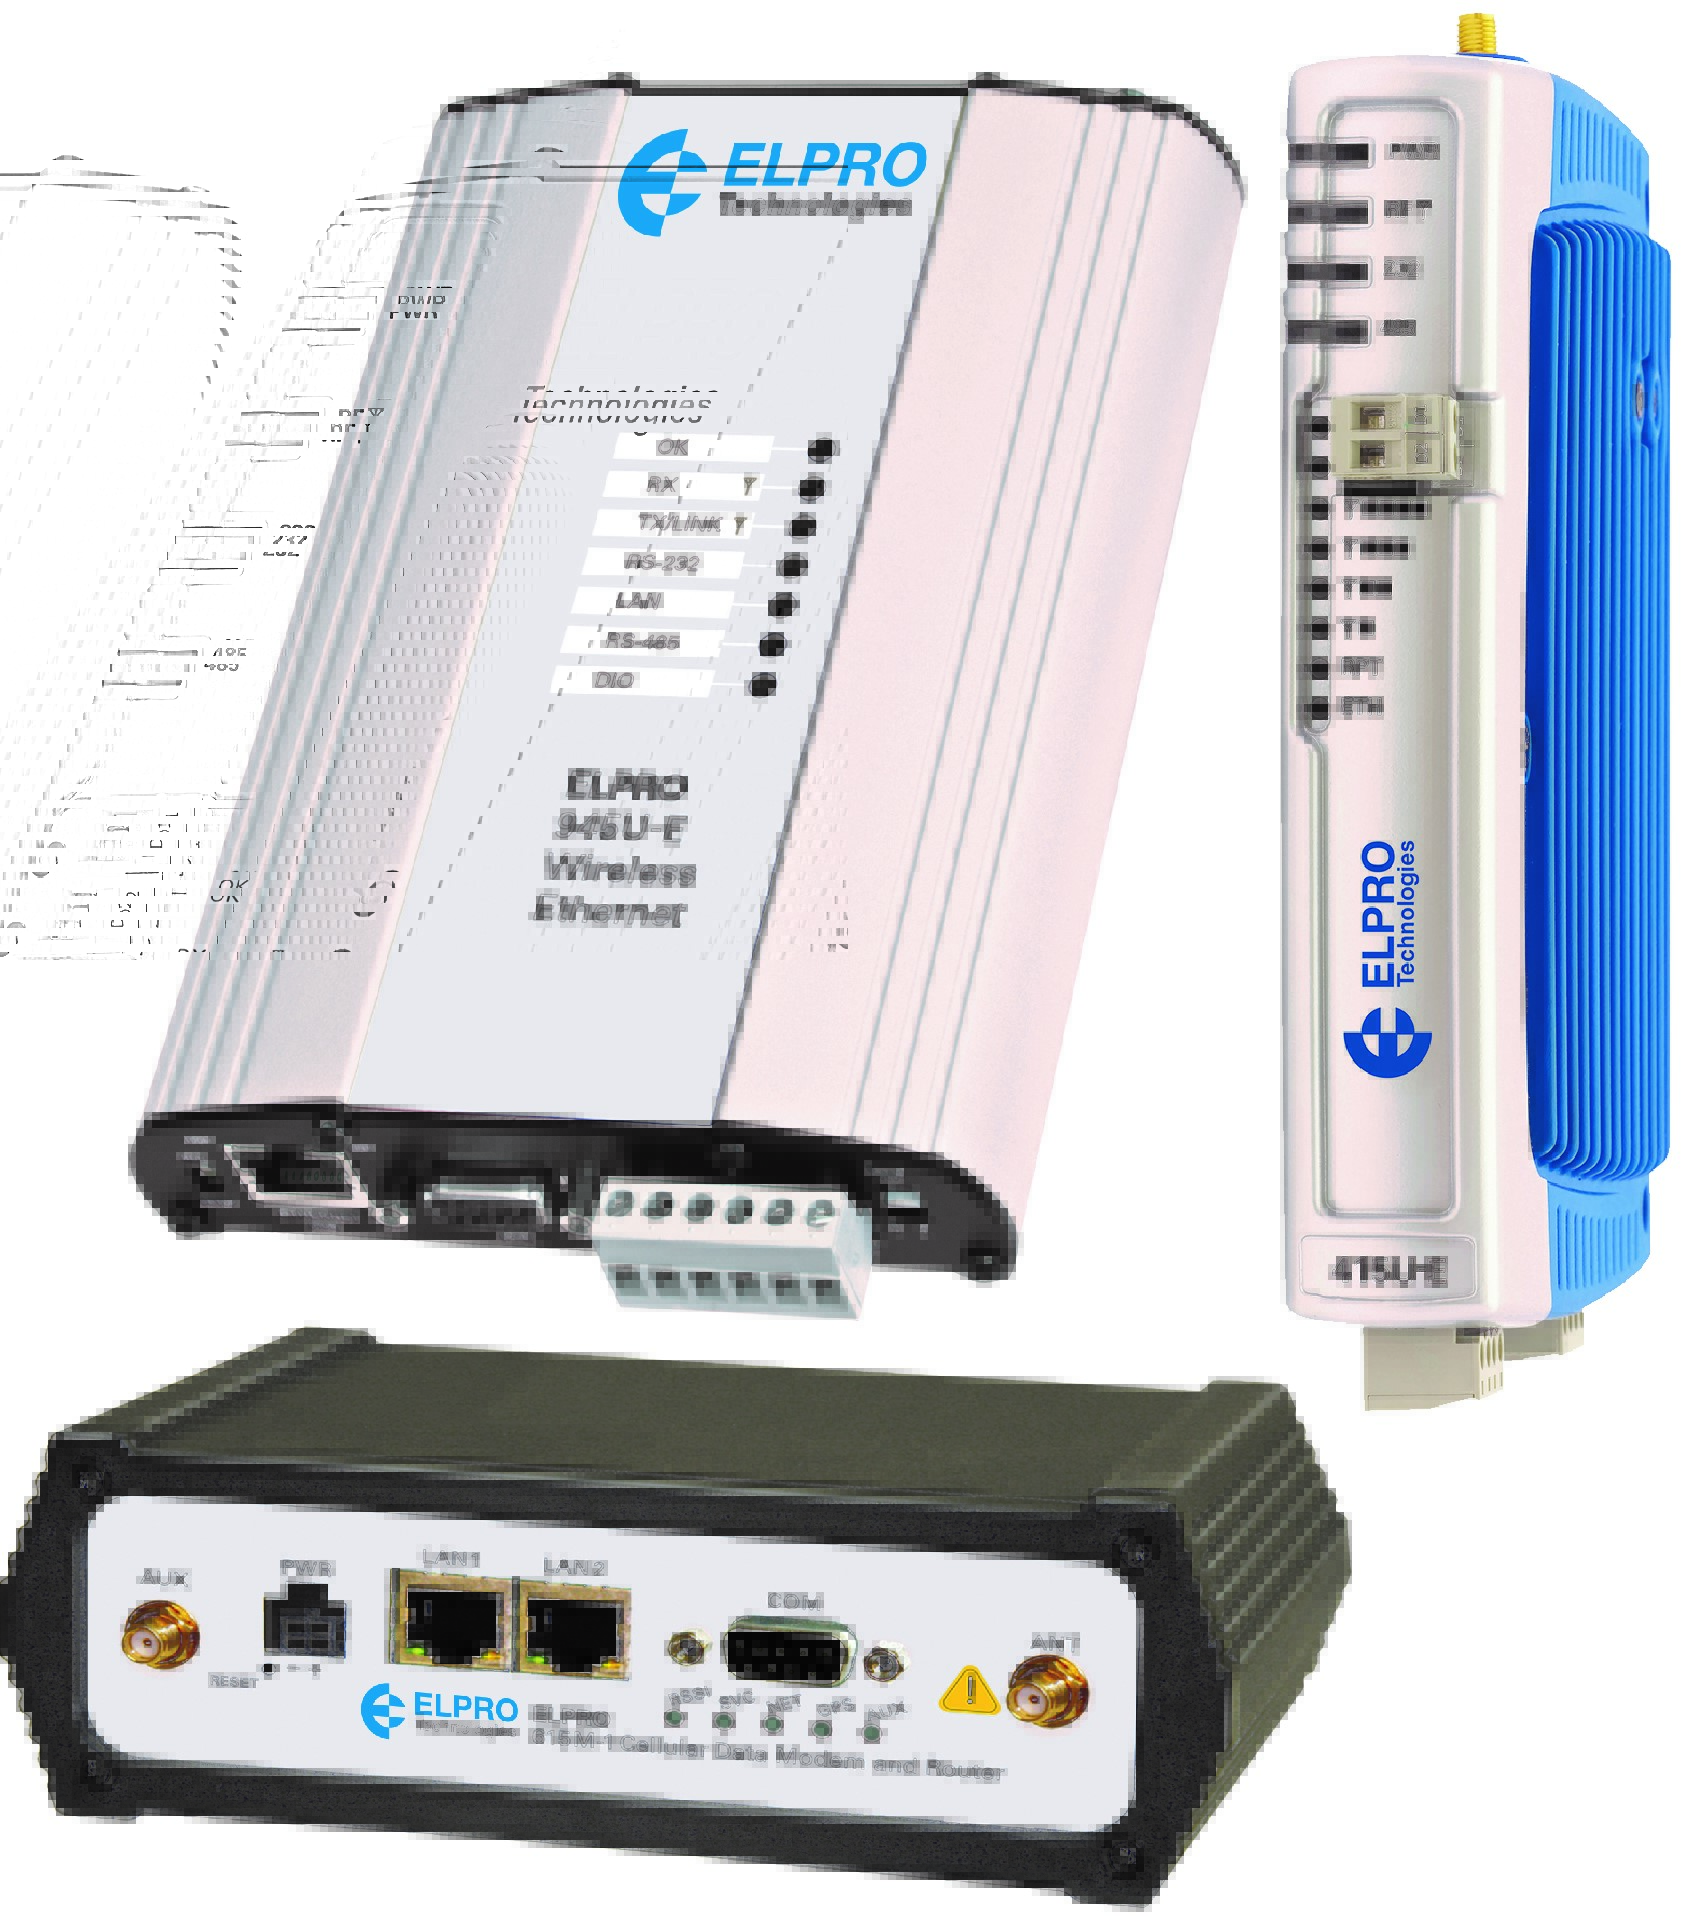 Elpro's Industrial wireless modems